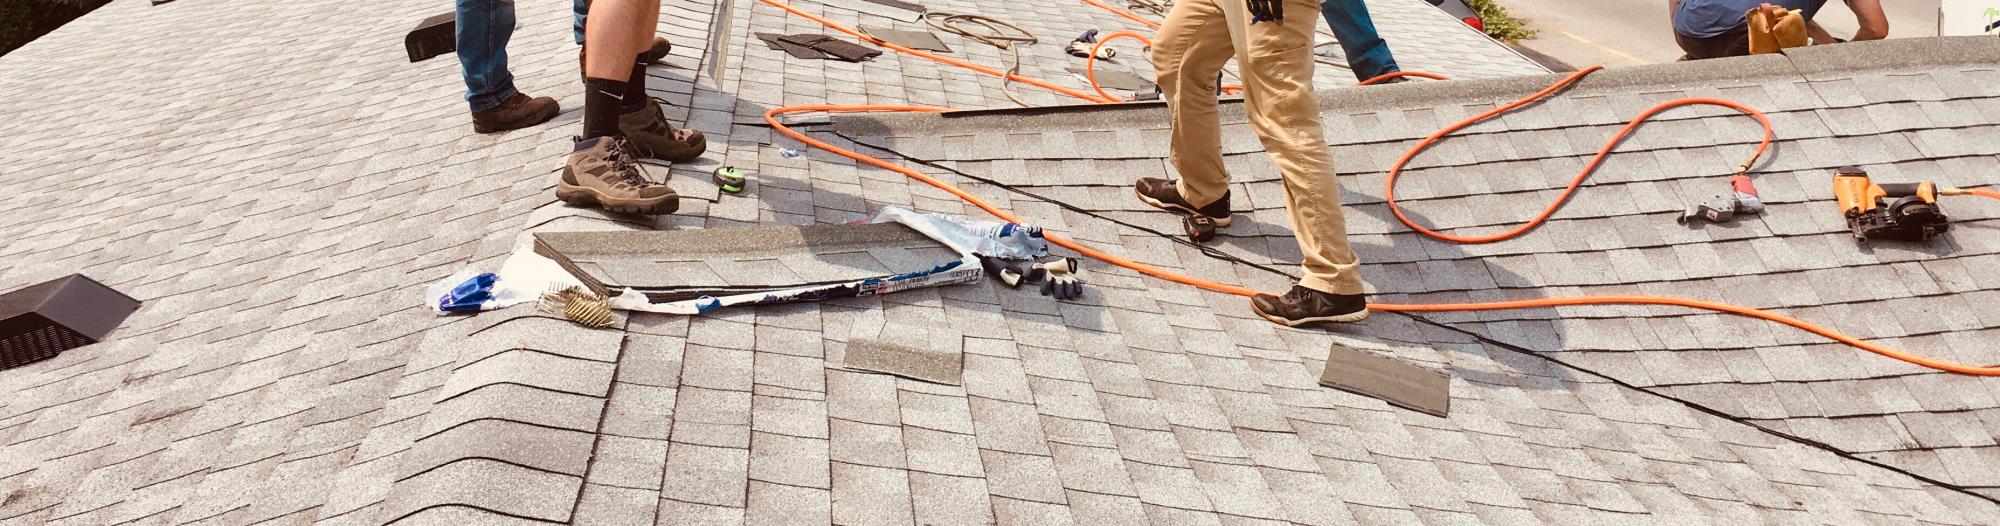 roofers repairing grey asphalt shingles being repaired in the afternoon using an electric drill and heavy duty stapler